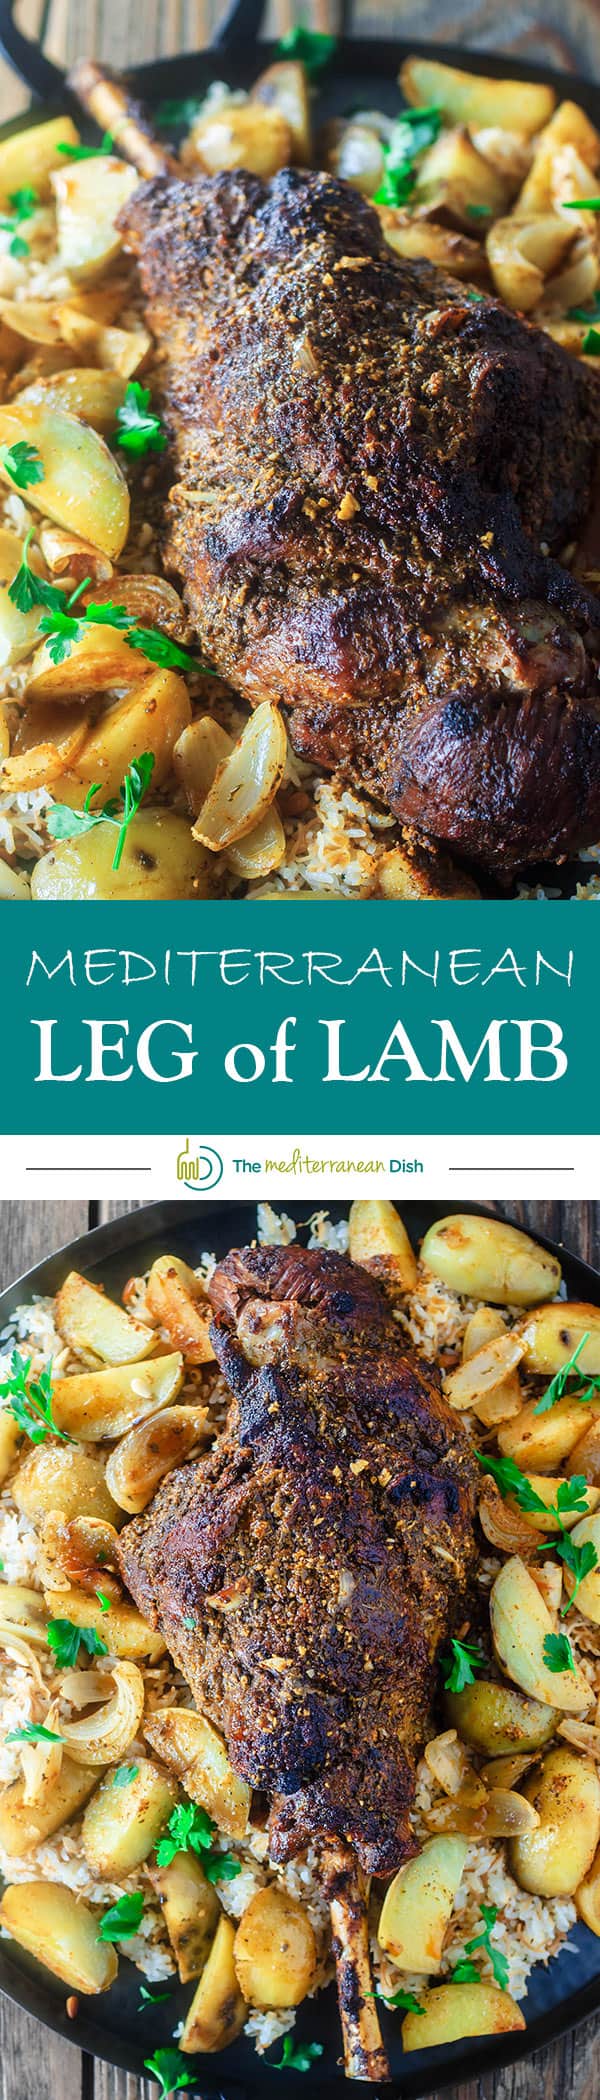 Mediterranean-style Leg of Lamb Recipe | The Mediterranean Dish. Leg of lamb covered in a Mediterranean rub of fresh garlic, spices, olive oil and lemon juice. Roasted with potato wedges and served over rice pilaf. A delicious Easter recipe or for your next family dinner! Recipe comes with step-by-step photos!